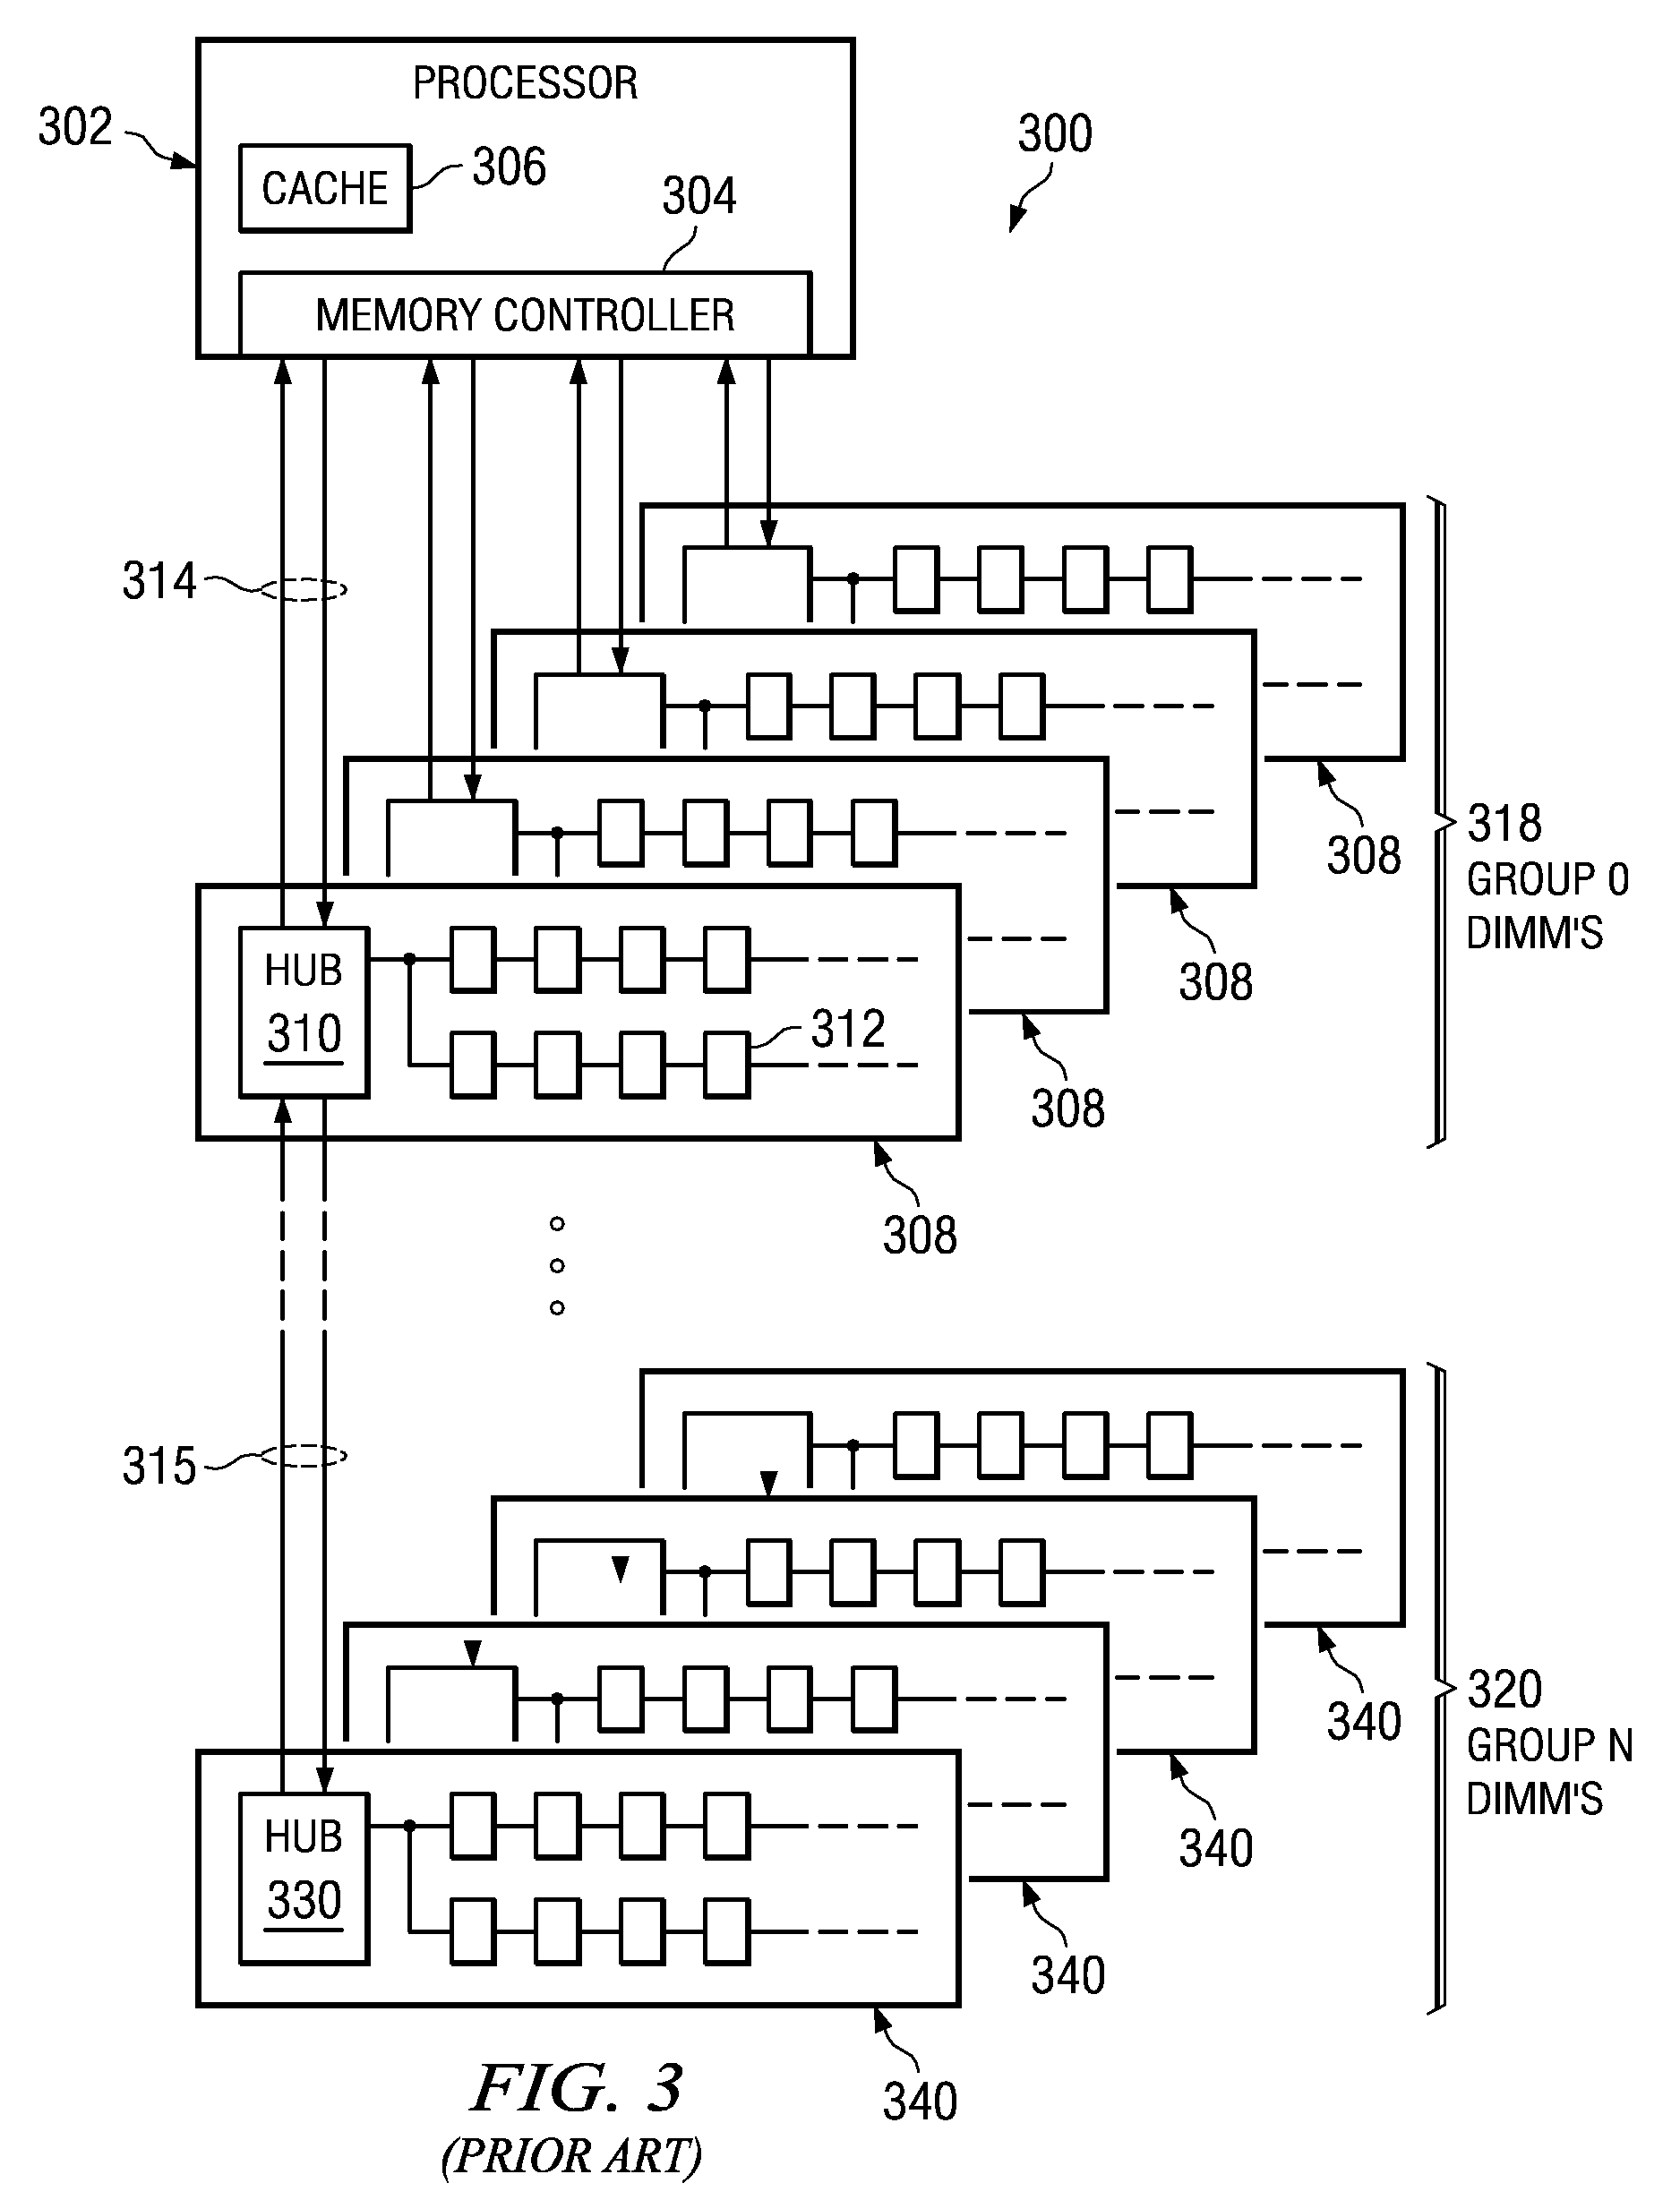 Buffered Memory Module Supporting Double the Memory Device Data Width in the Same Physical Space as a Conventional Memory Module